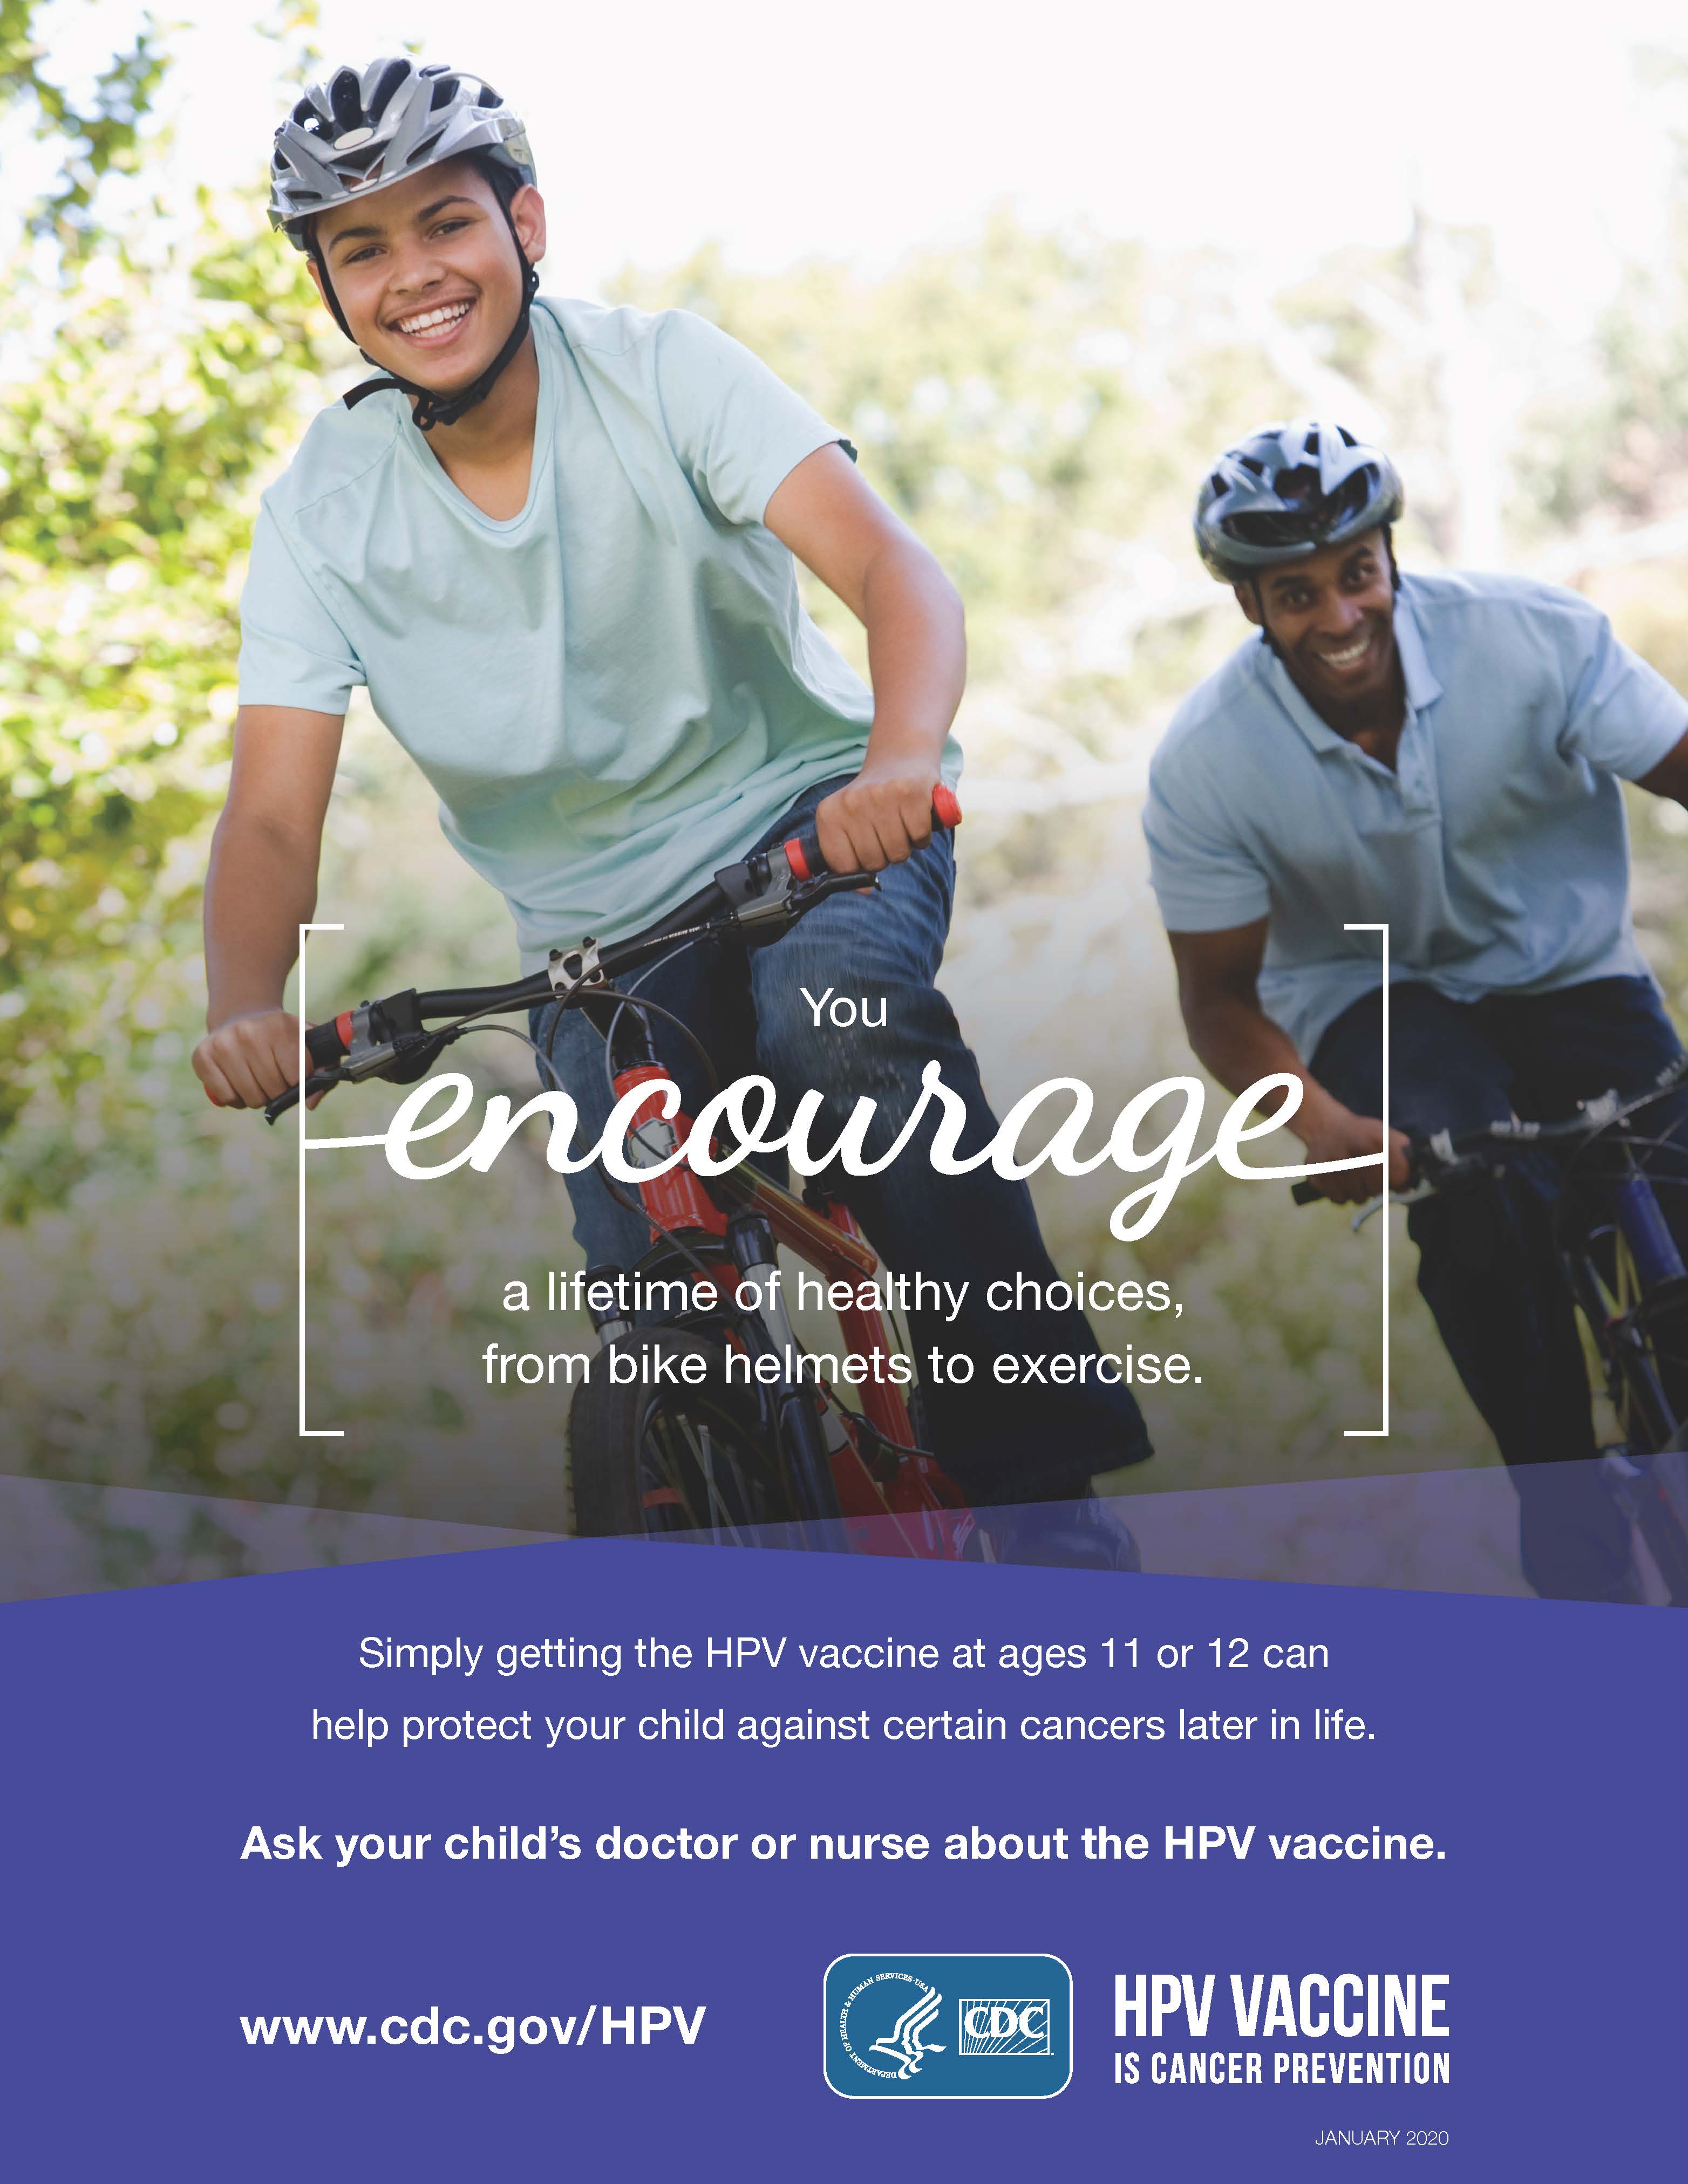 You encourage a lifetime of healthy choices, from bike helmets to exercise.